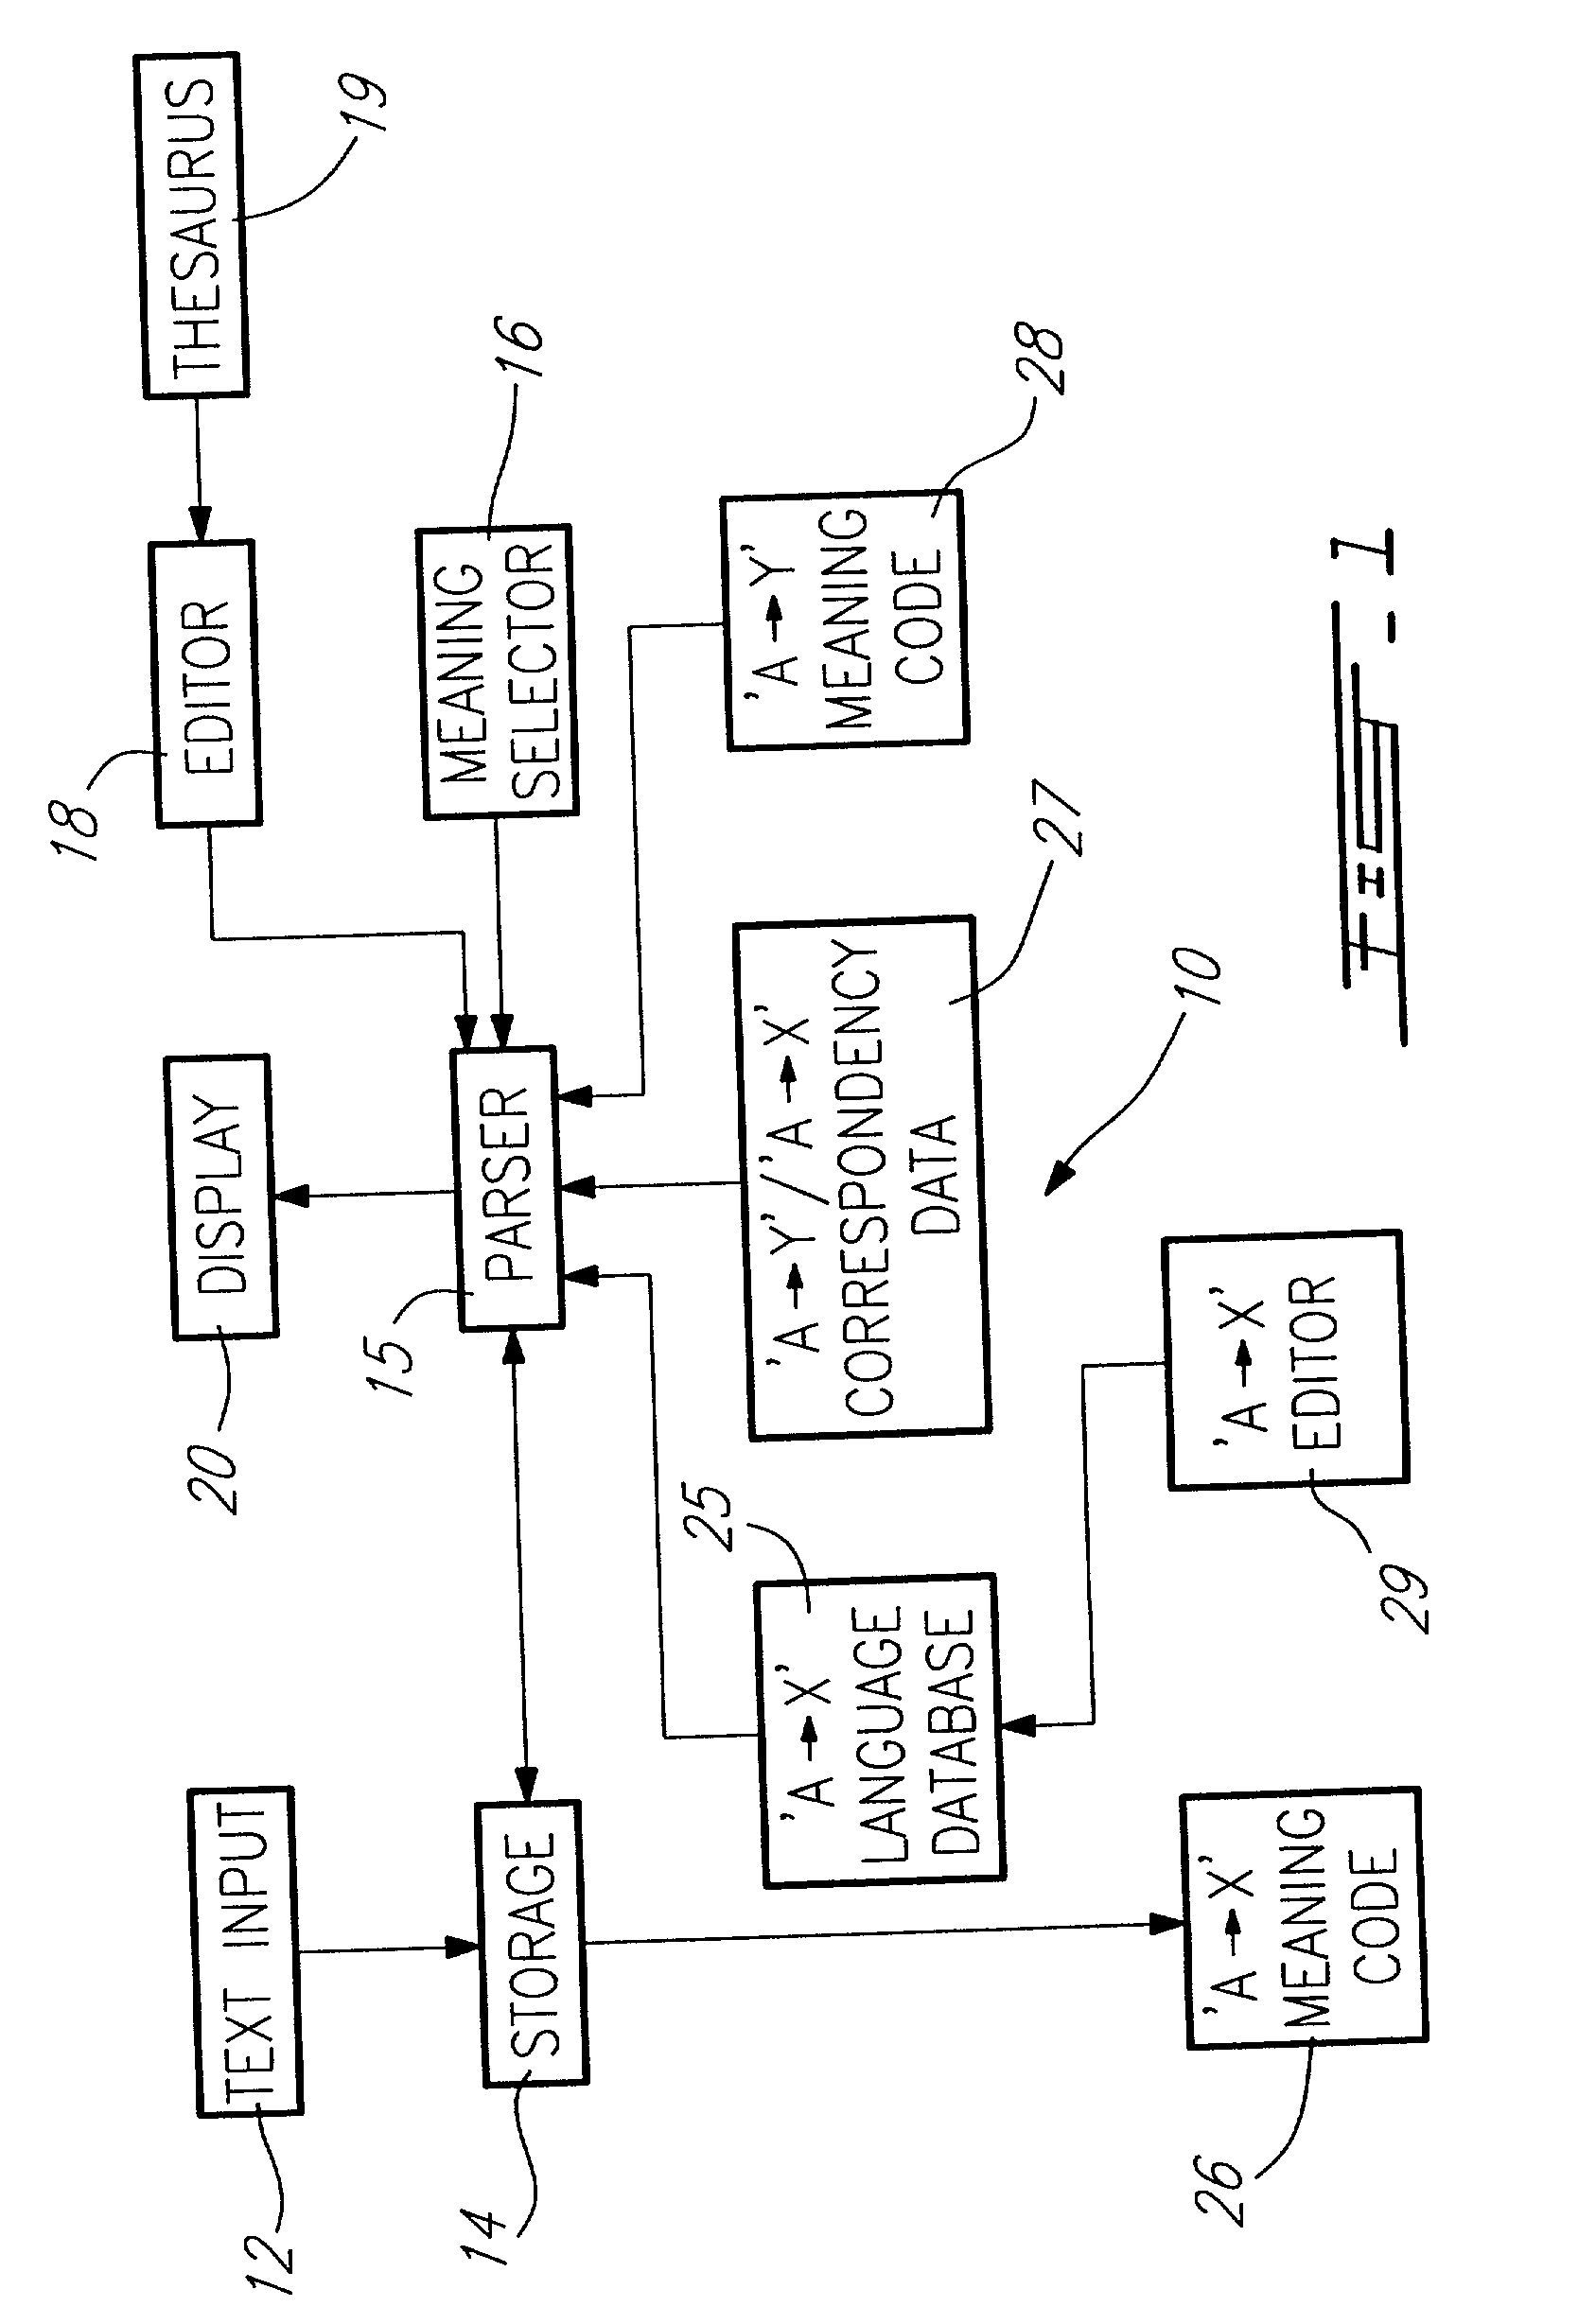 Operator-assisted translation system and method for unconstrained source text